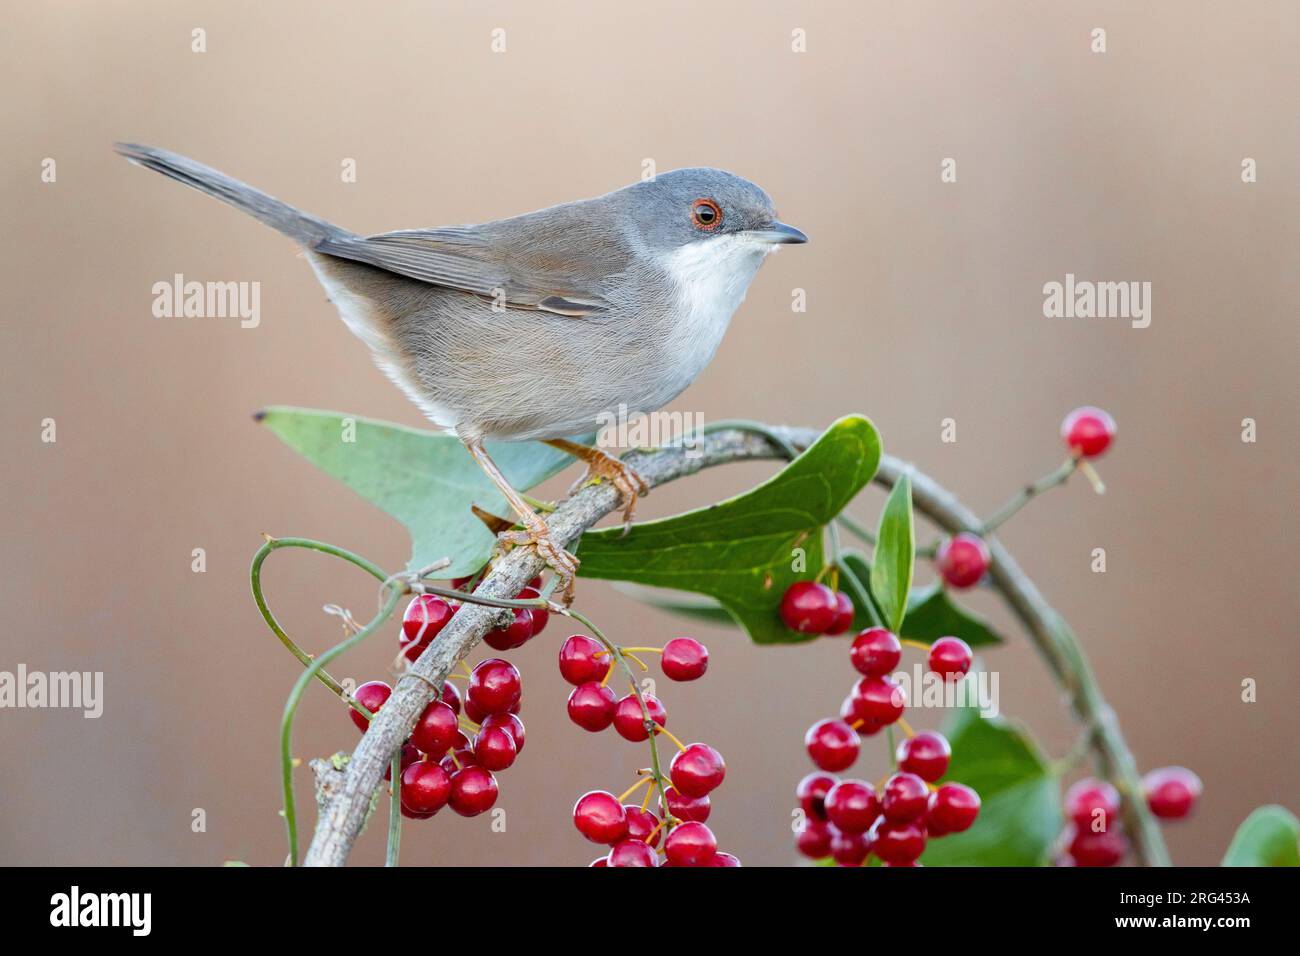 Sardinian Warbler (Sylvia melanocephala), side view of an adult female perched on a Common Smilax with berries, Campania, Italy Stock Photo